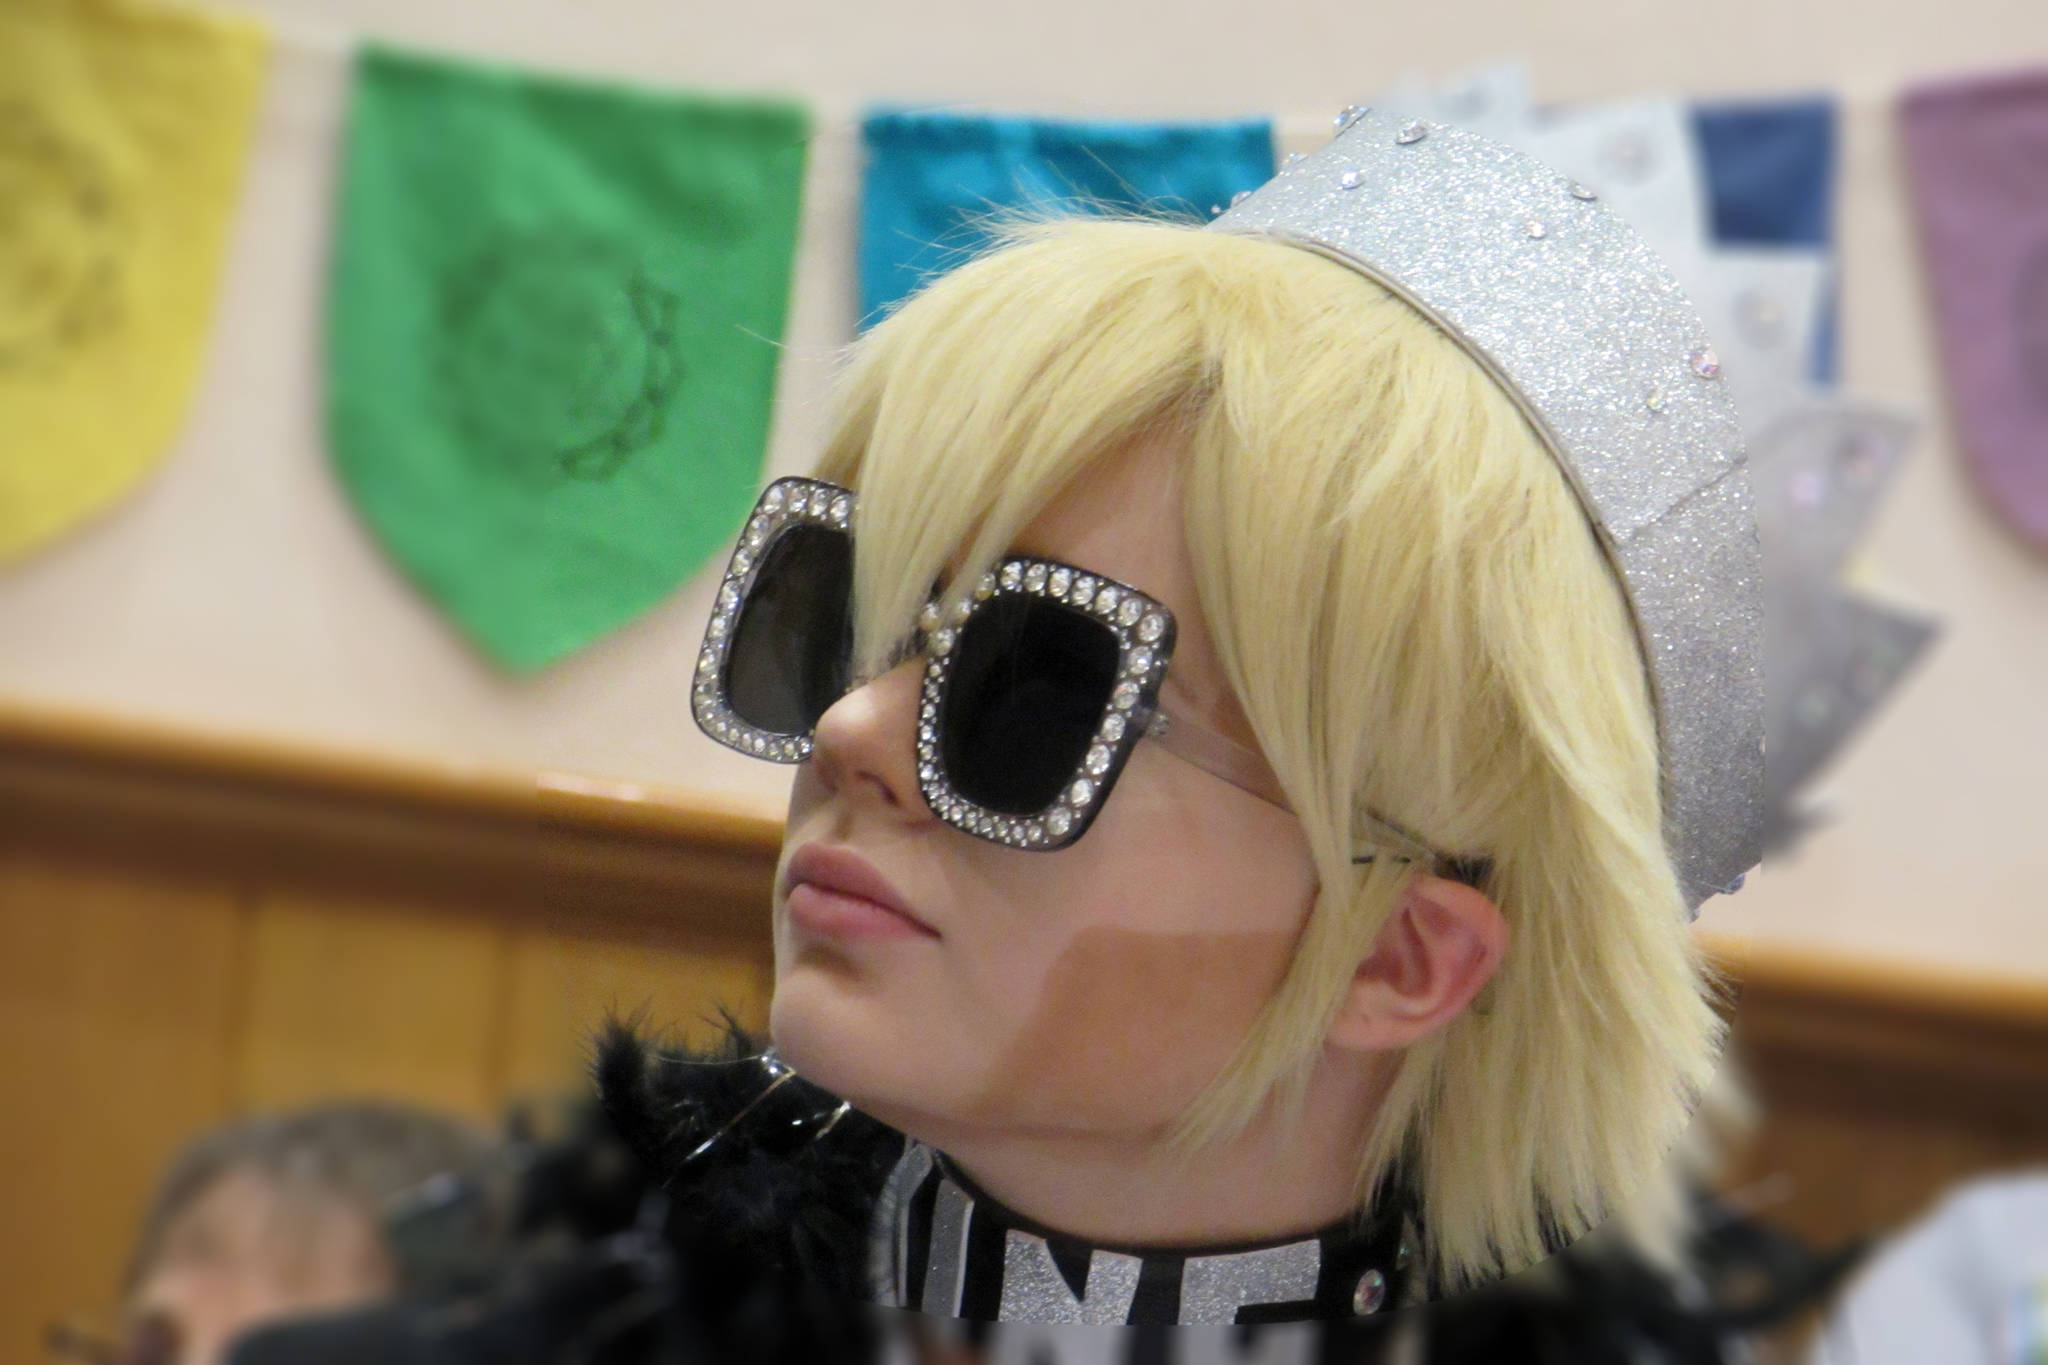 King Key watches the Juneau Pride Chorus sing at the Stonewall 50 Tea & Dance event in McPhetres Hall Saturday, Feb. 9, 2019. (Ben Hohenstatt | Capital City Weekly)